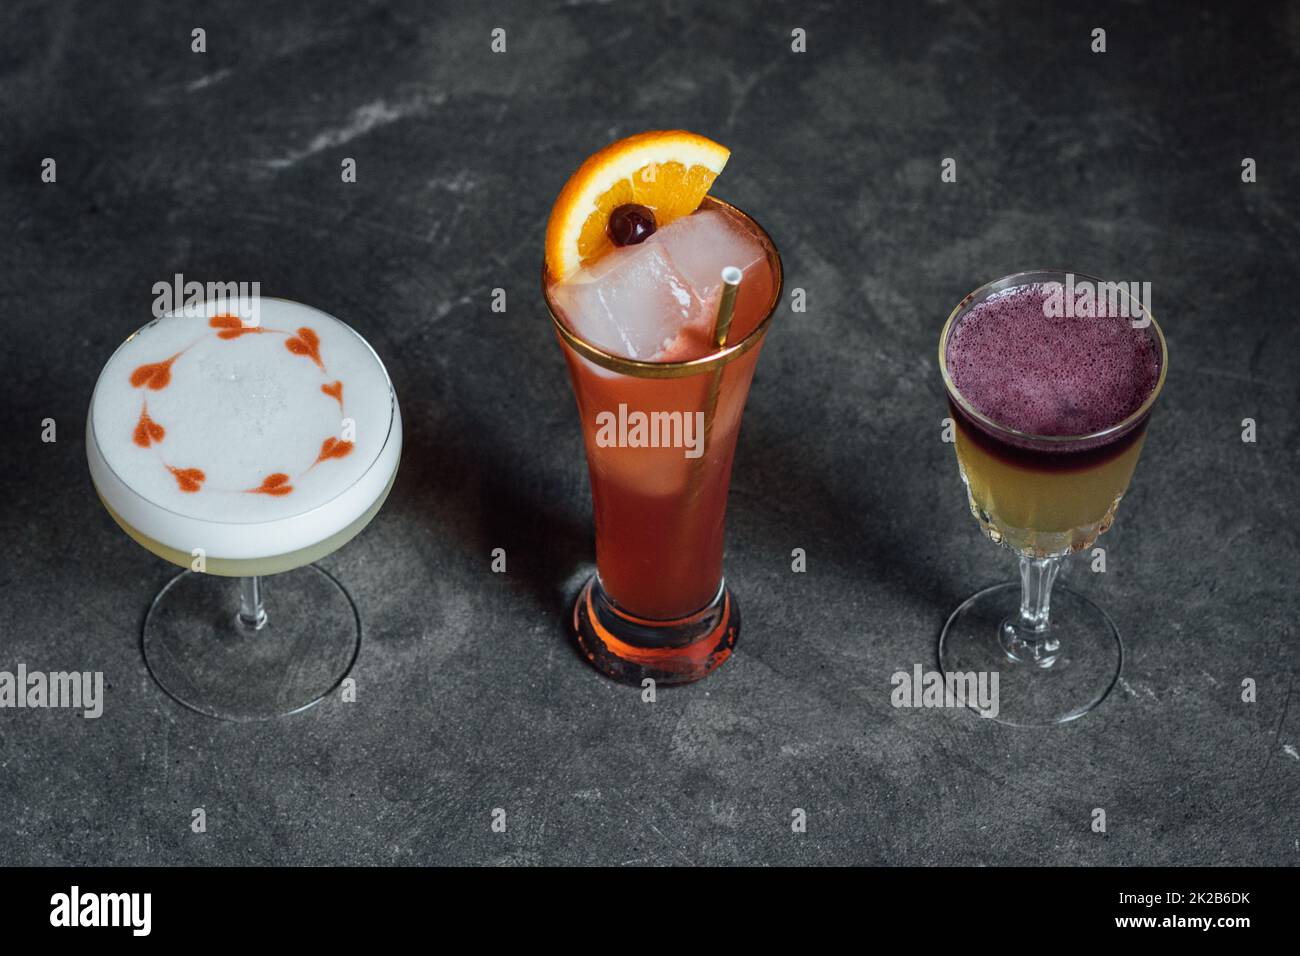 collection of three cocktails, whiskey sours, hearts drawn with bitters on egg white foam Stock Photo